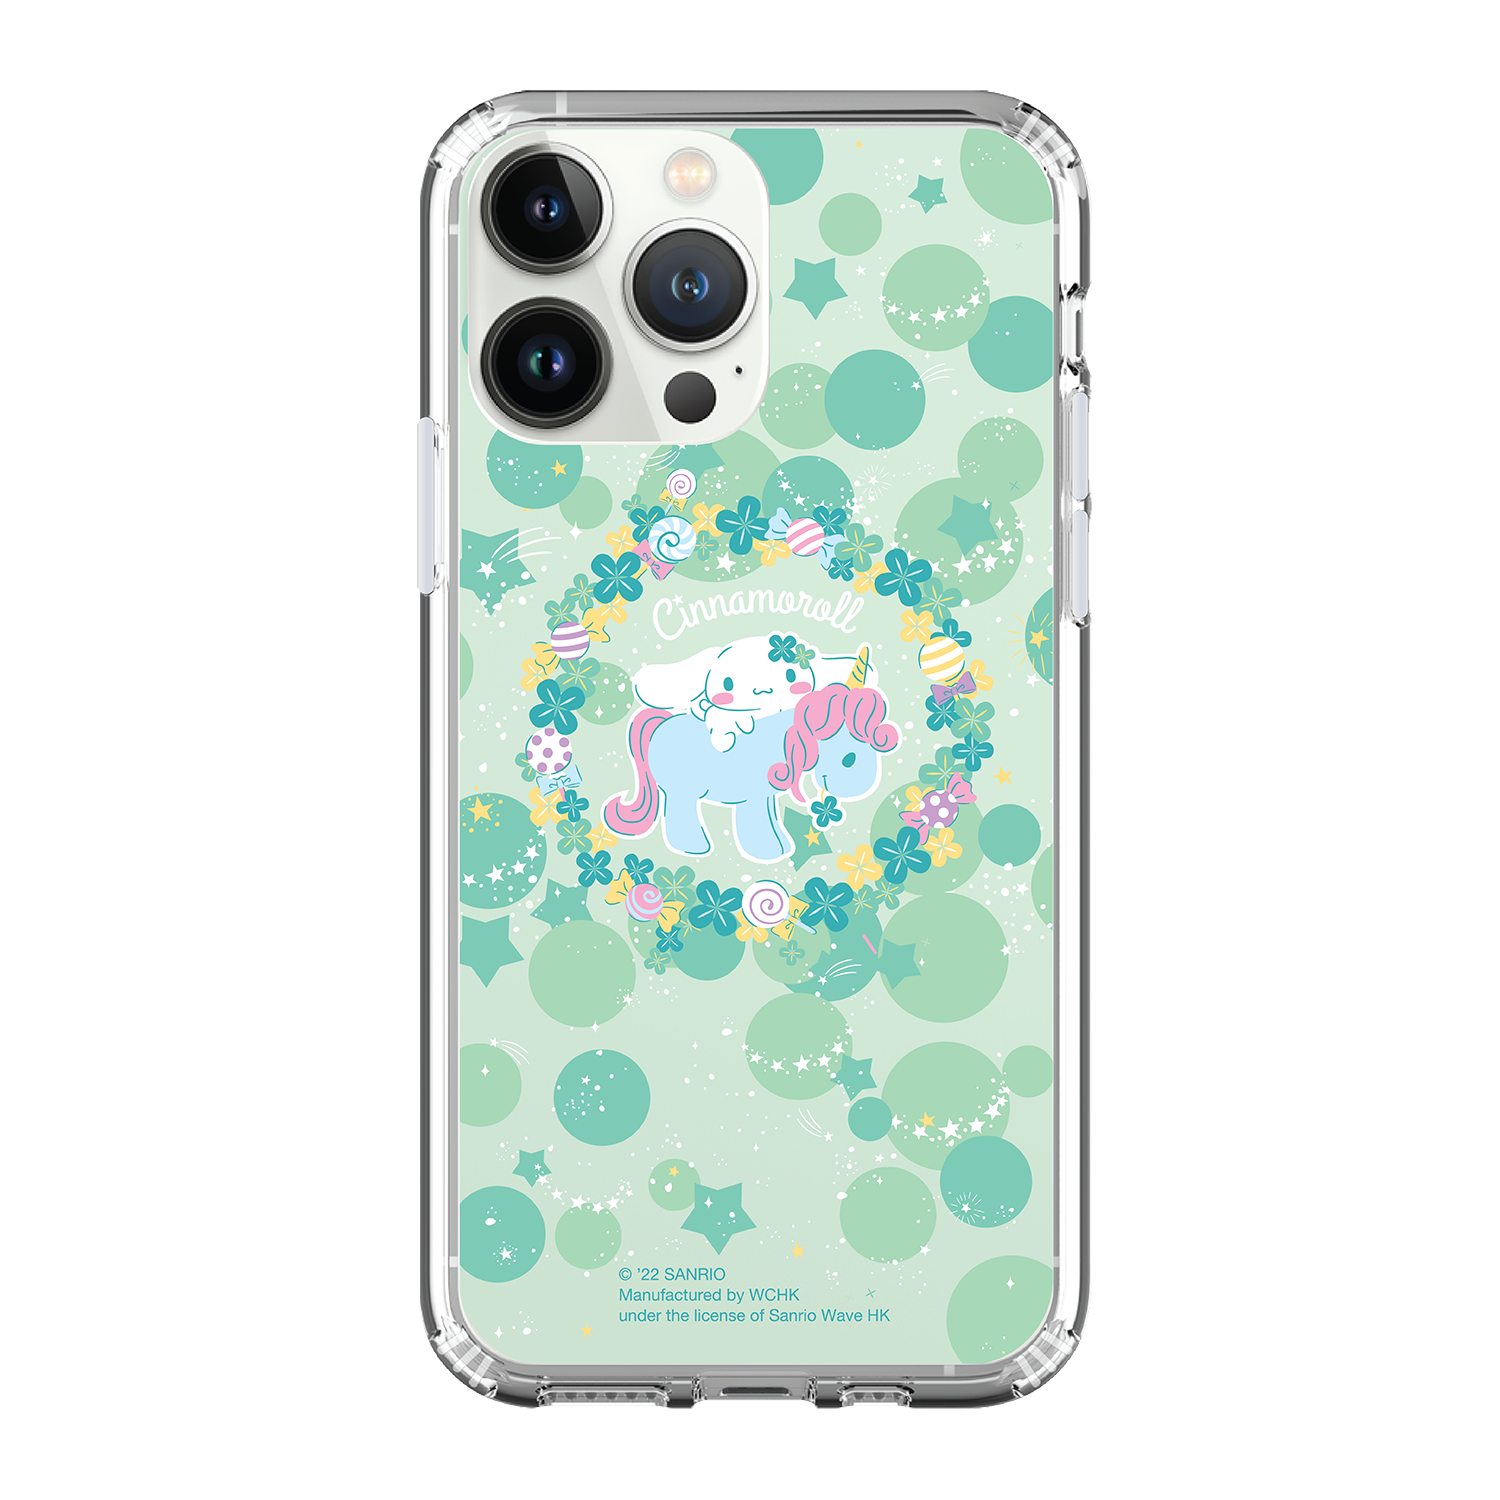 Cinnamoroll Clear Case / iPhone Case / Android Case / Samsung Case 防撞透明手機殼 (CN116)